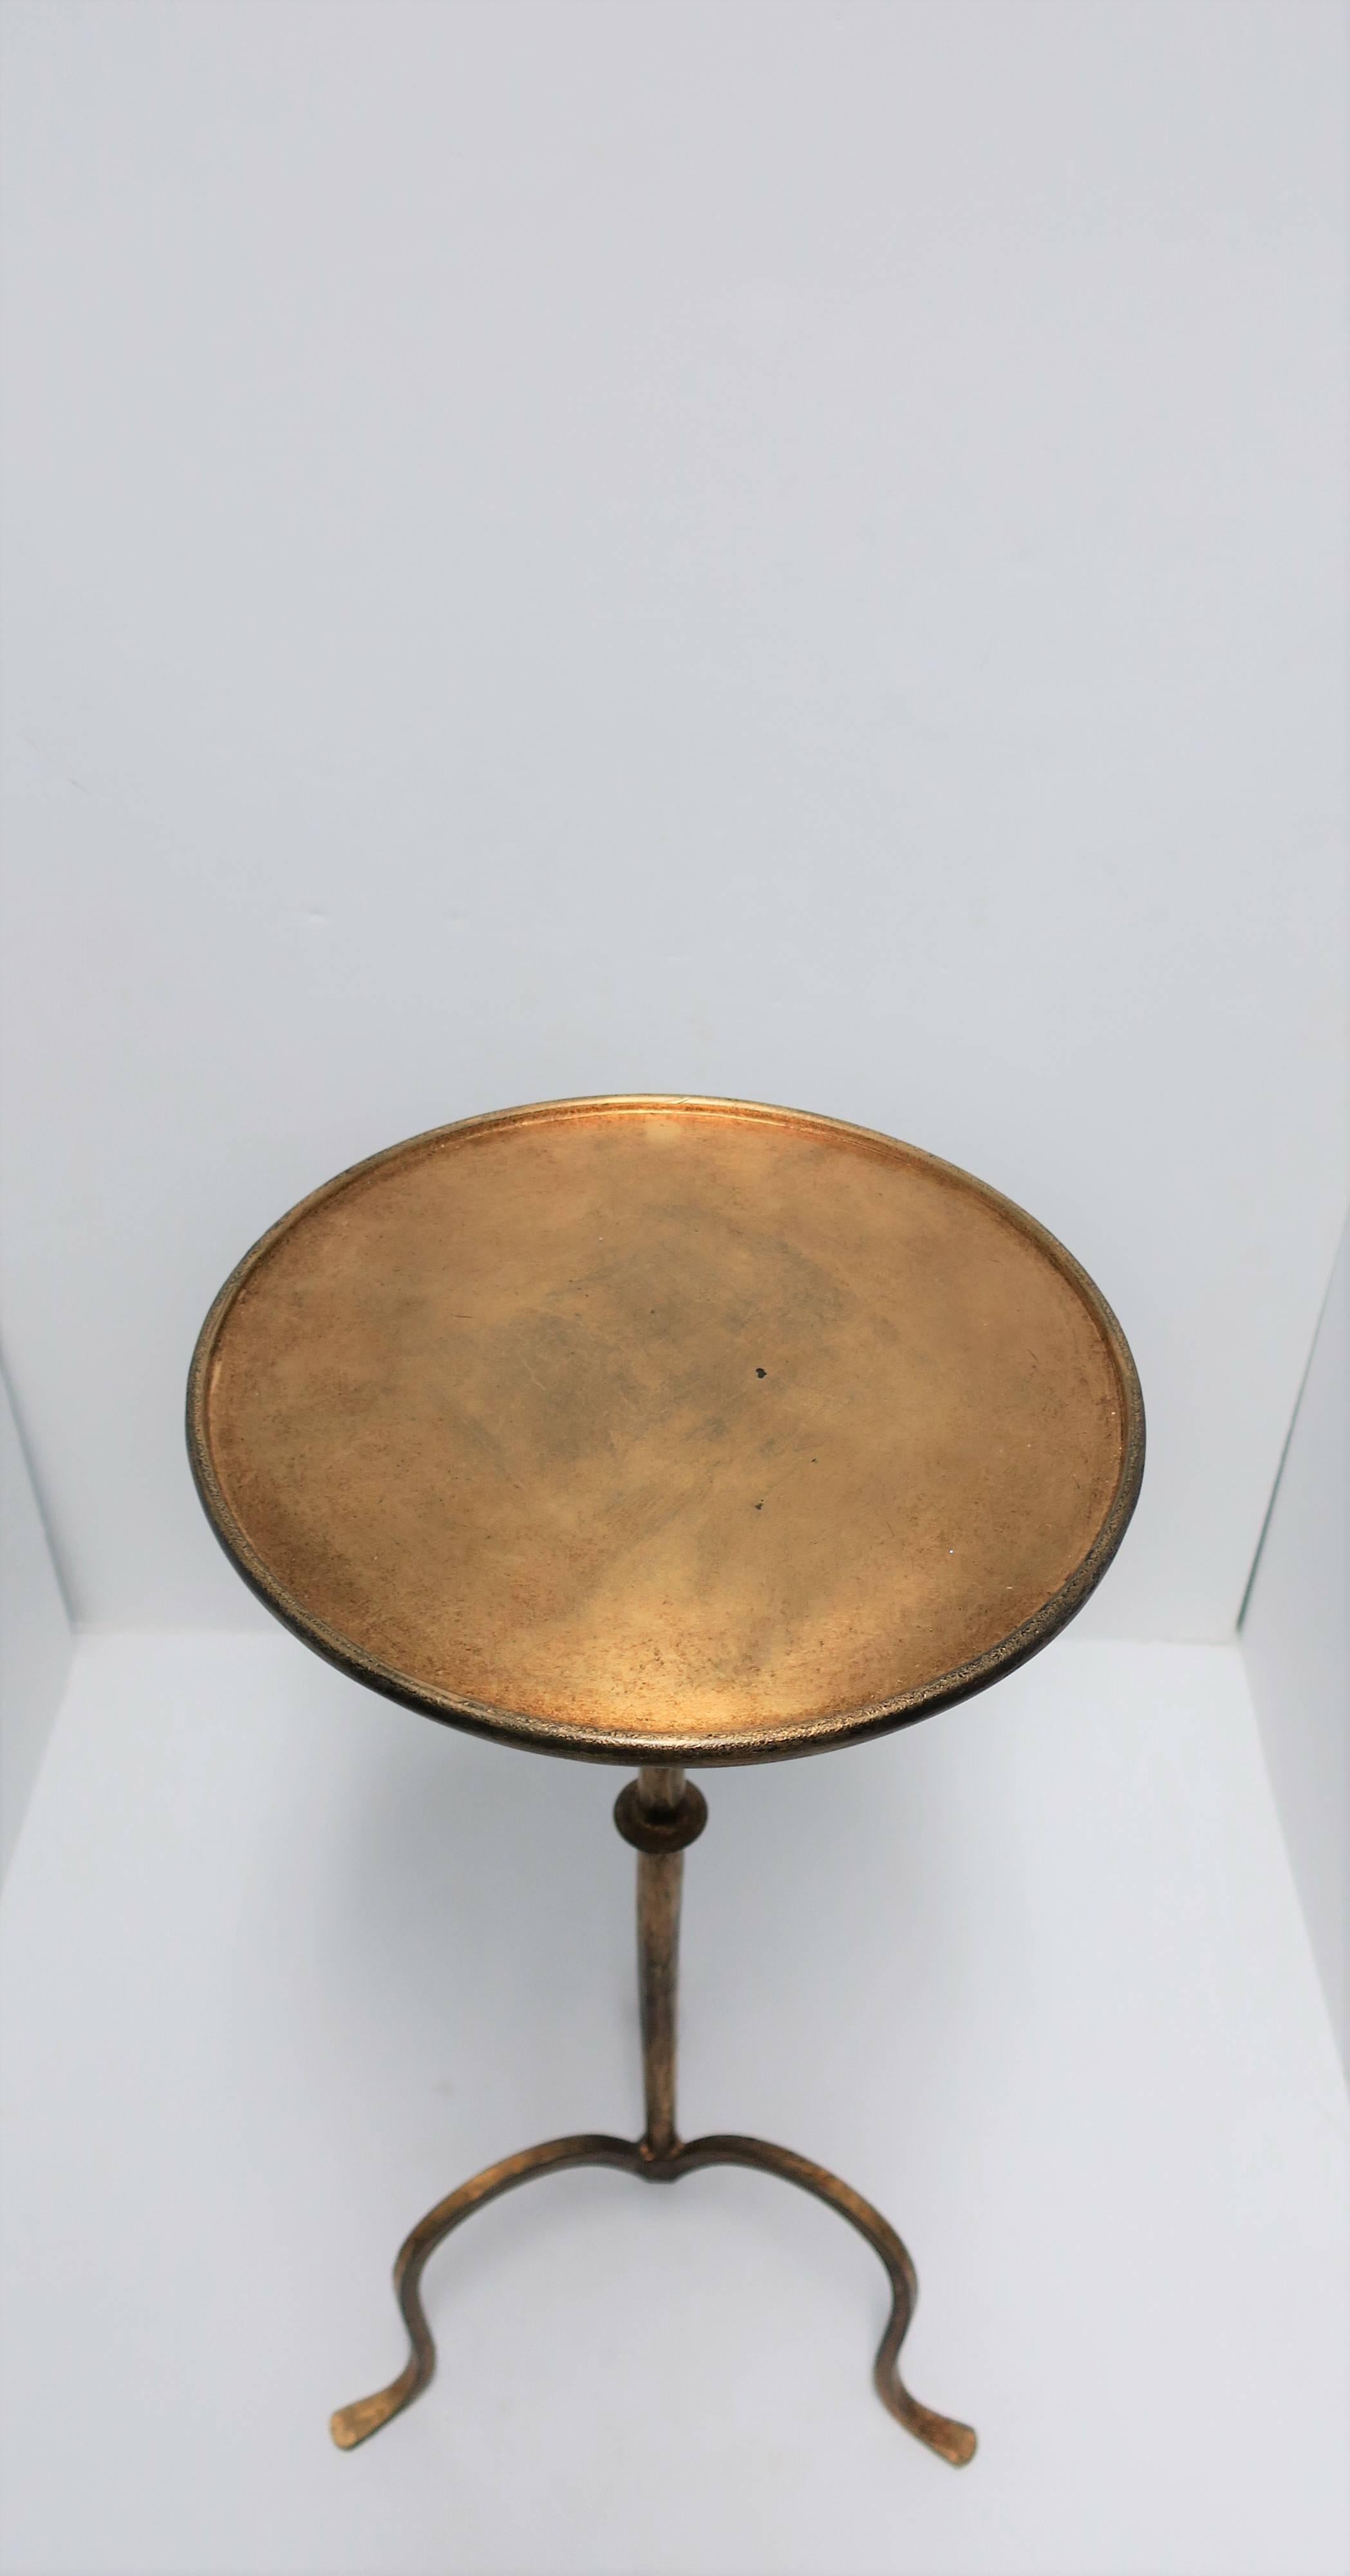 Contemporary Gold Gilt Round Side Table with Tri-Pod Base, 21st Century